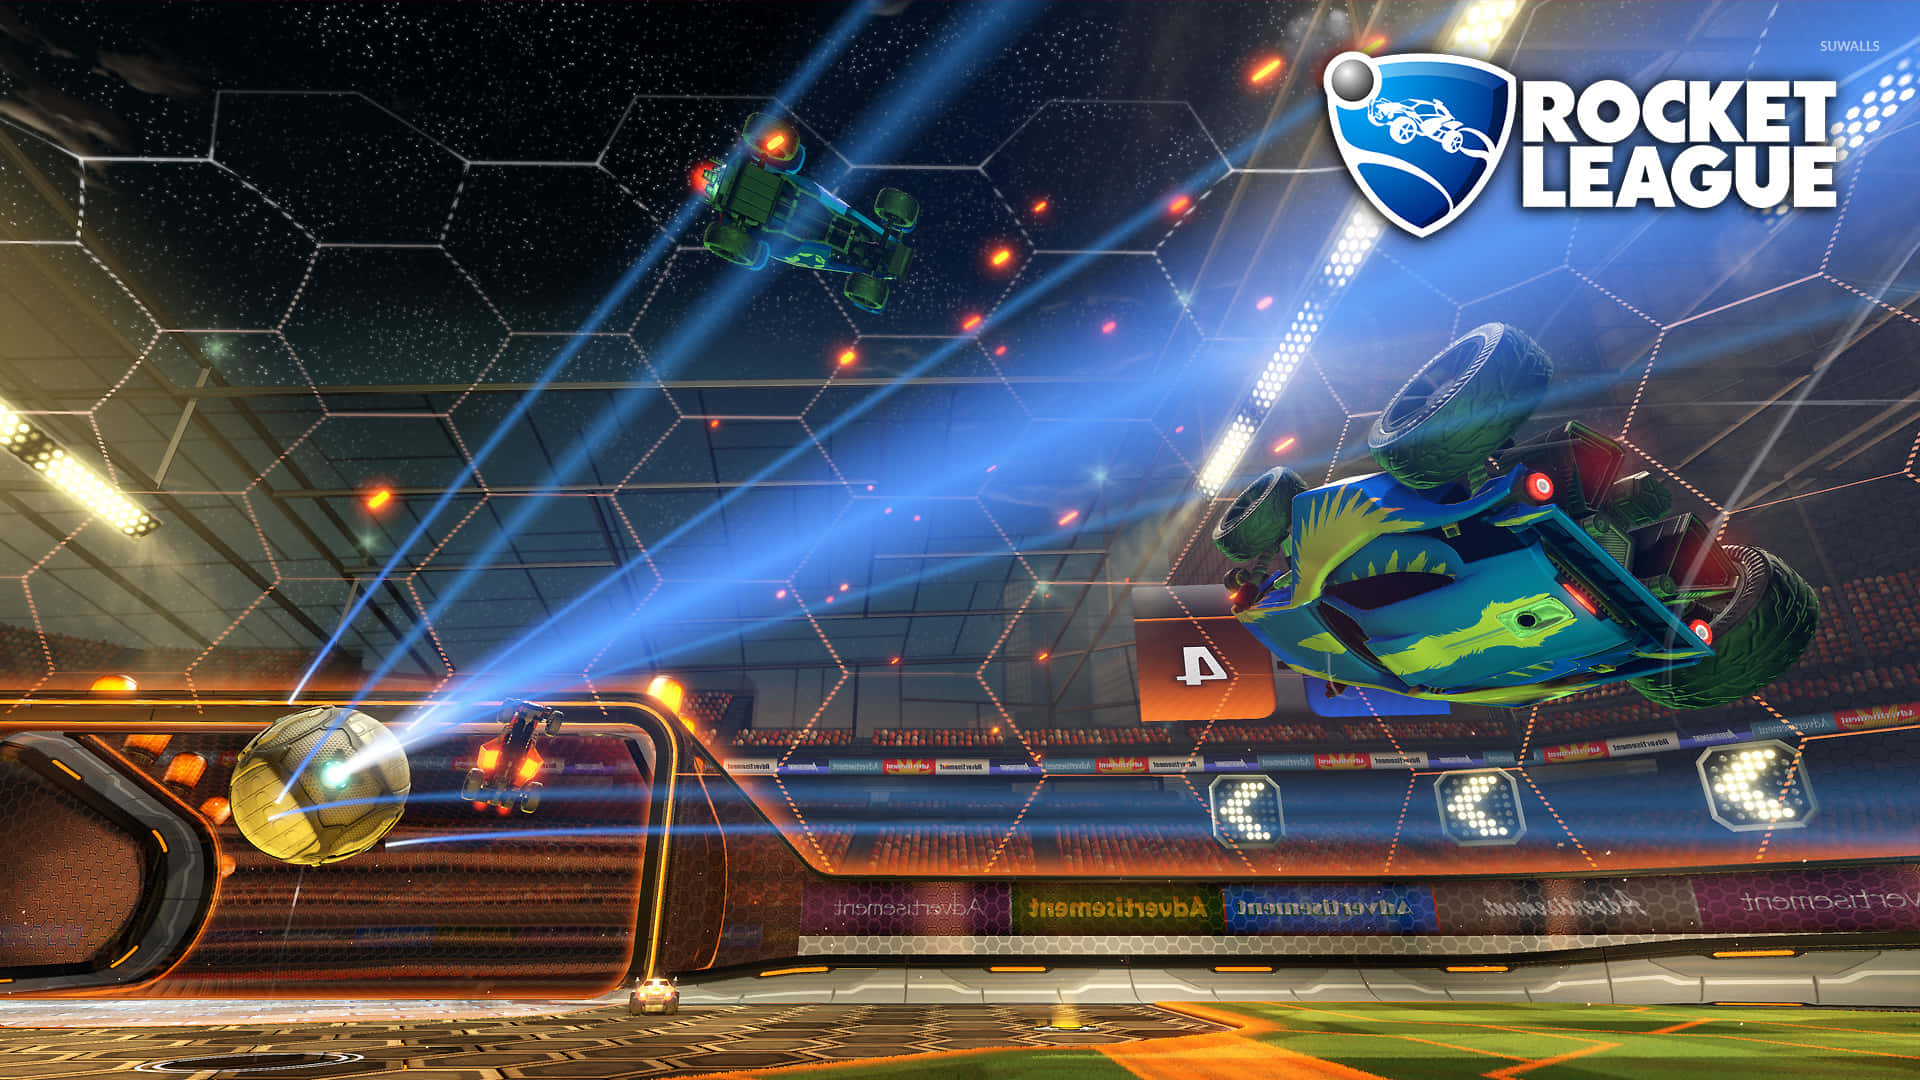 Play Rocket League in Full High Definition